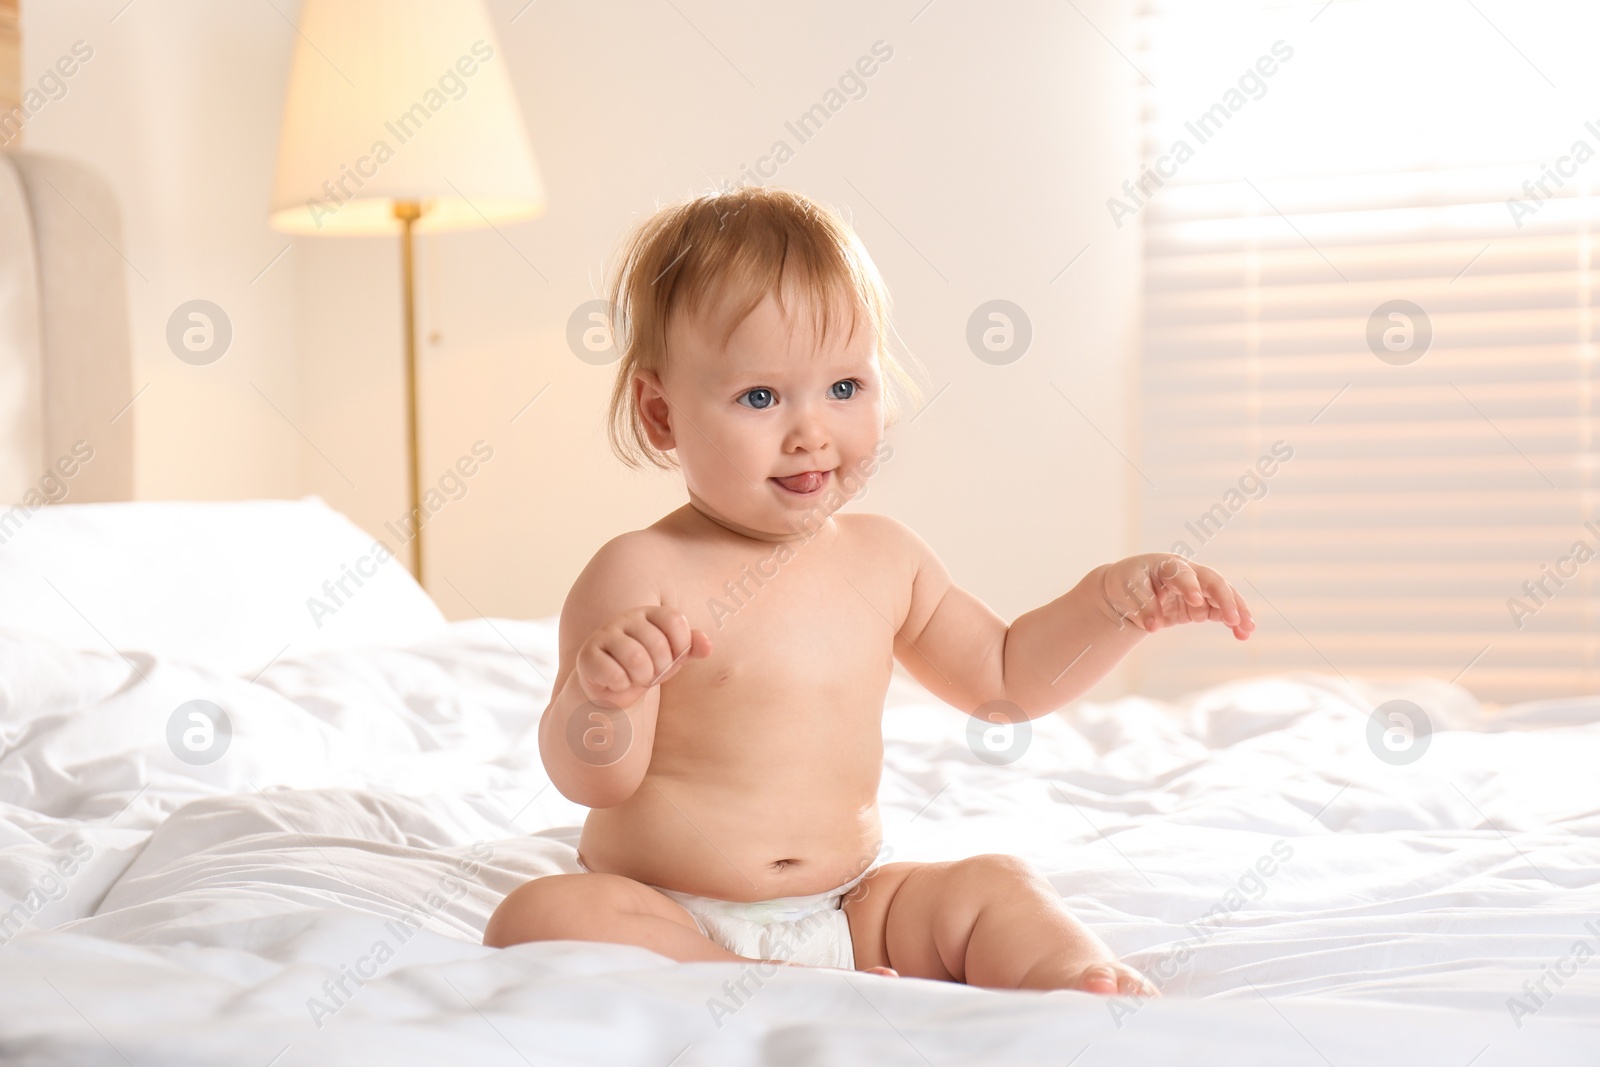 Photo of Cute little baby in diaper sitting on bed